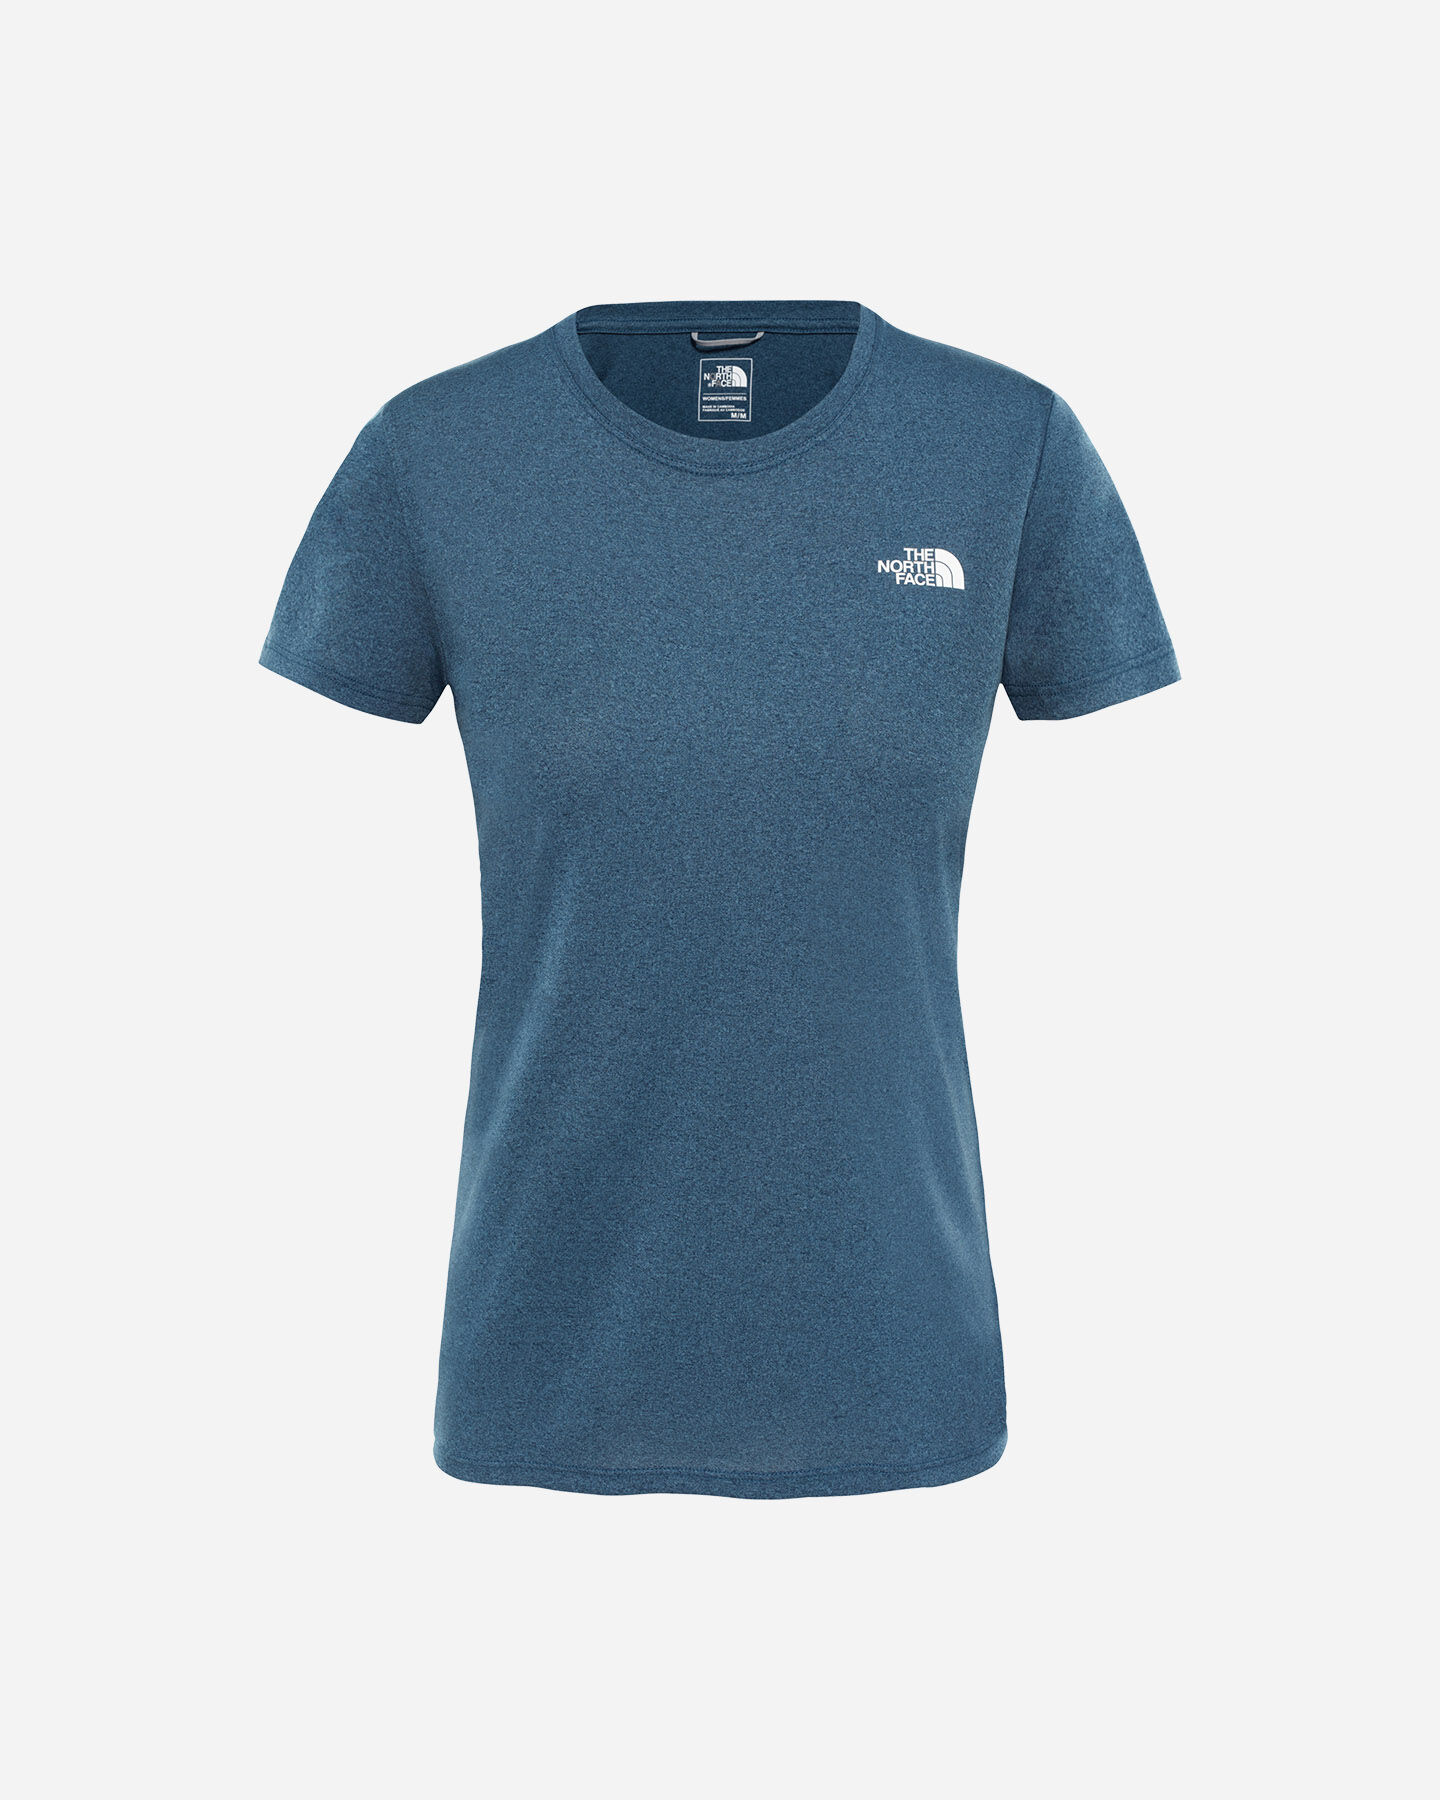  T-Shirt THE NORTH FACE REAXION AMP W S5017362|1LG|XS scatto 5